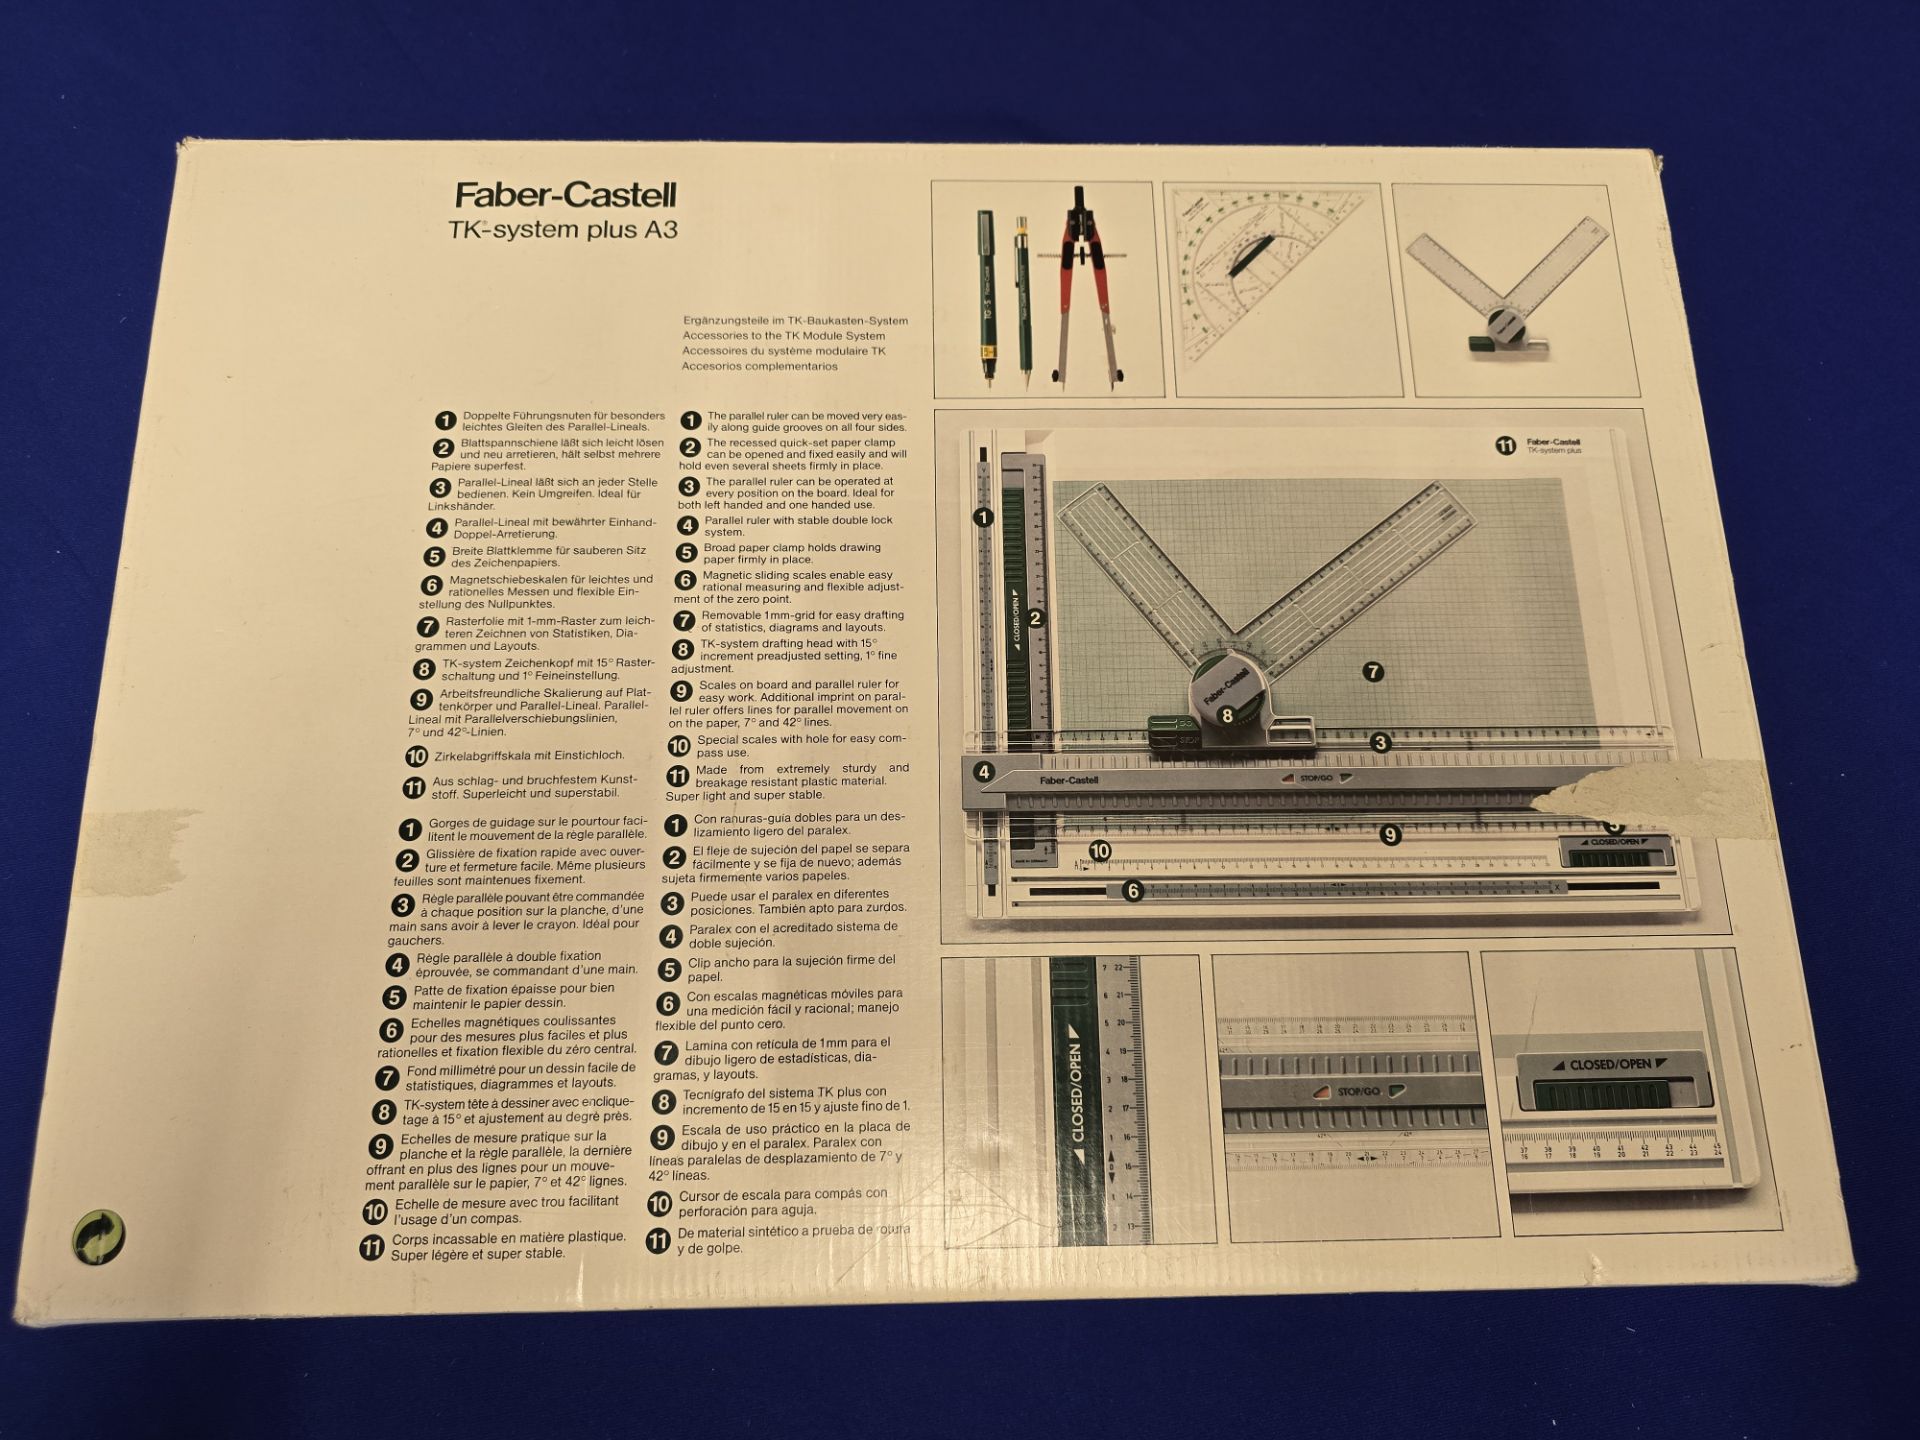 Faber-Castell TK-system plus A3 Technical drawing board + Extras - Image 10 of 16